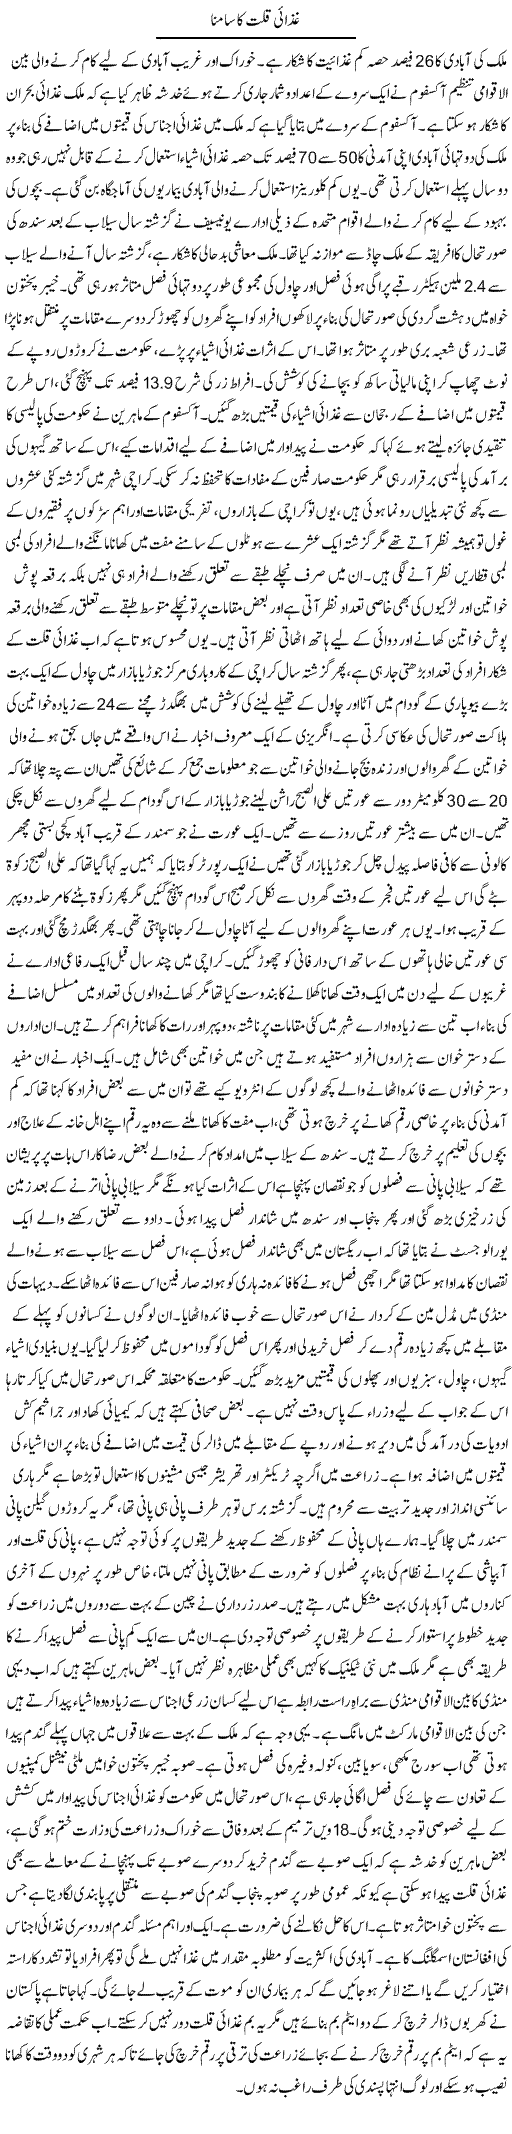 Shortage of Food Express Column Tauseef Ahmed 10 August 2011